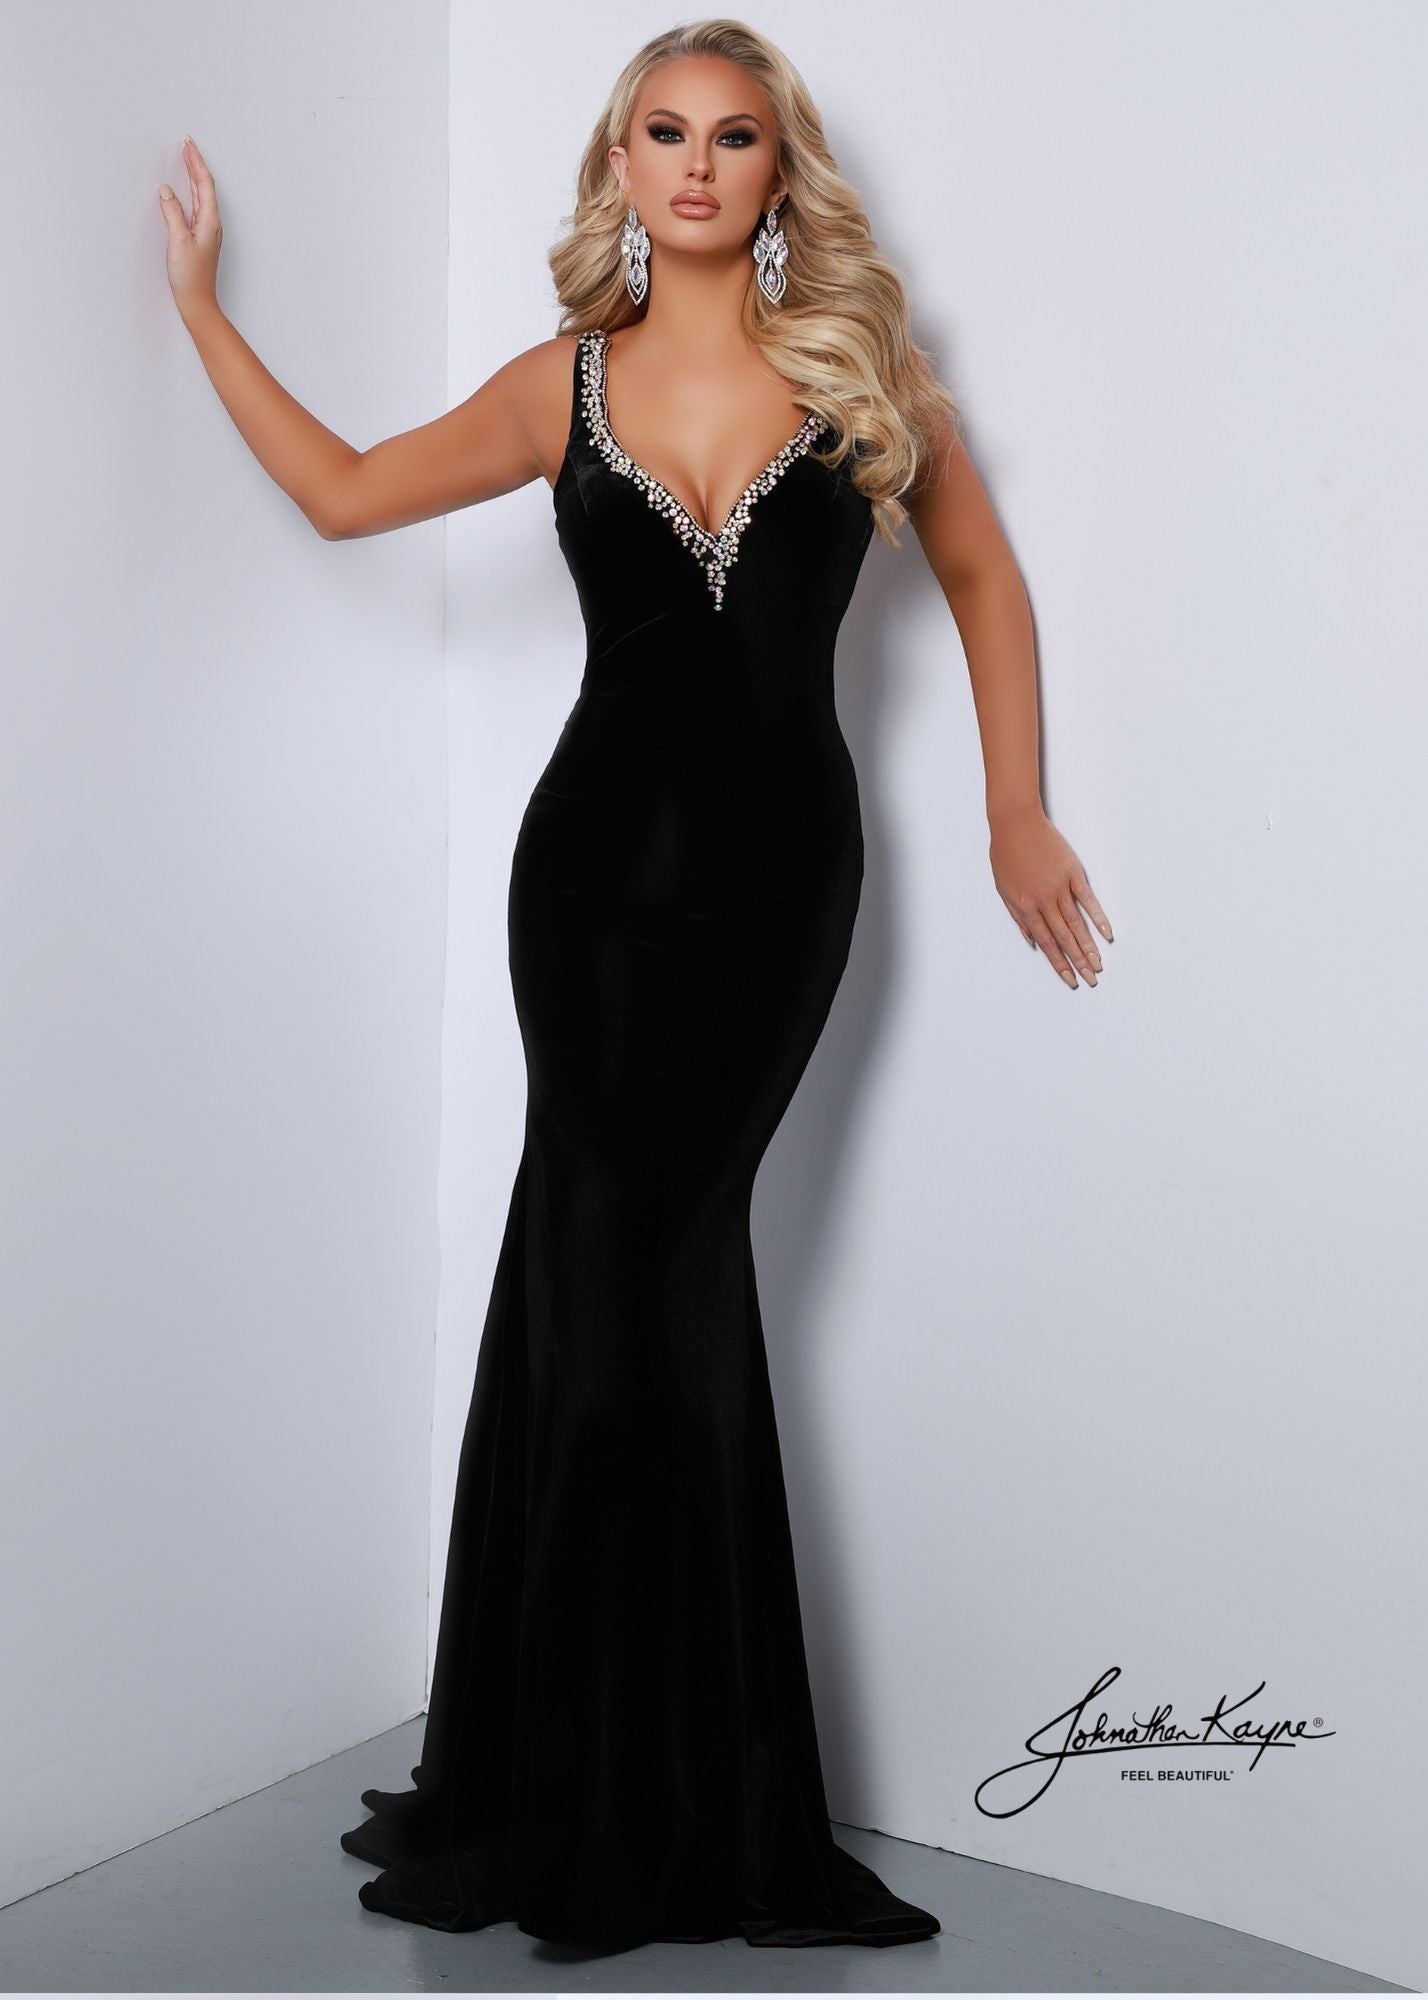 Look perfect on your special day in the Johnathan Kayne 2534 sleek stretch velvet gown. The V neckline and low back are adorned in rhinestones, and a corset back ensures a perfect fit. You'll feel comfortable and stunning in this classic velvet dress.